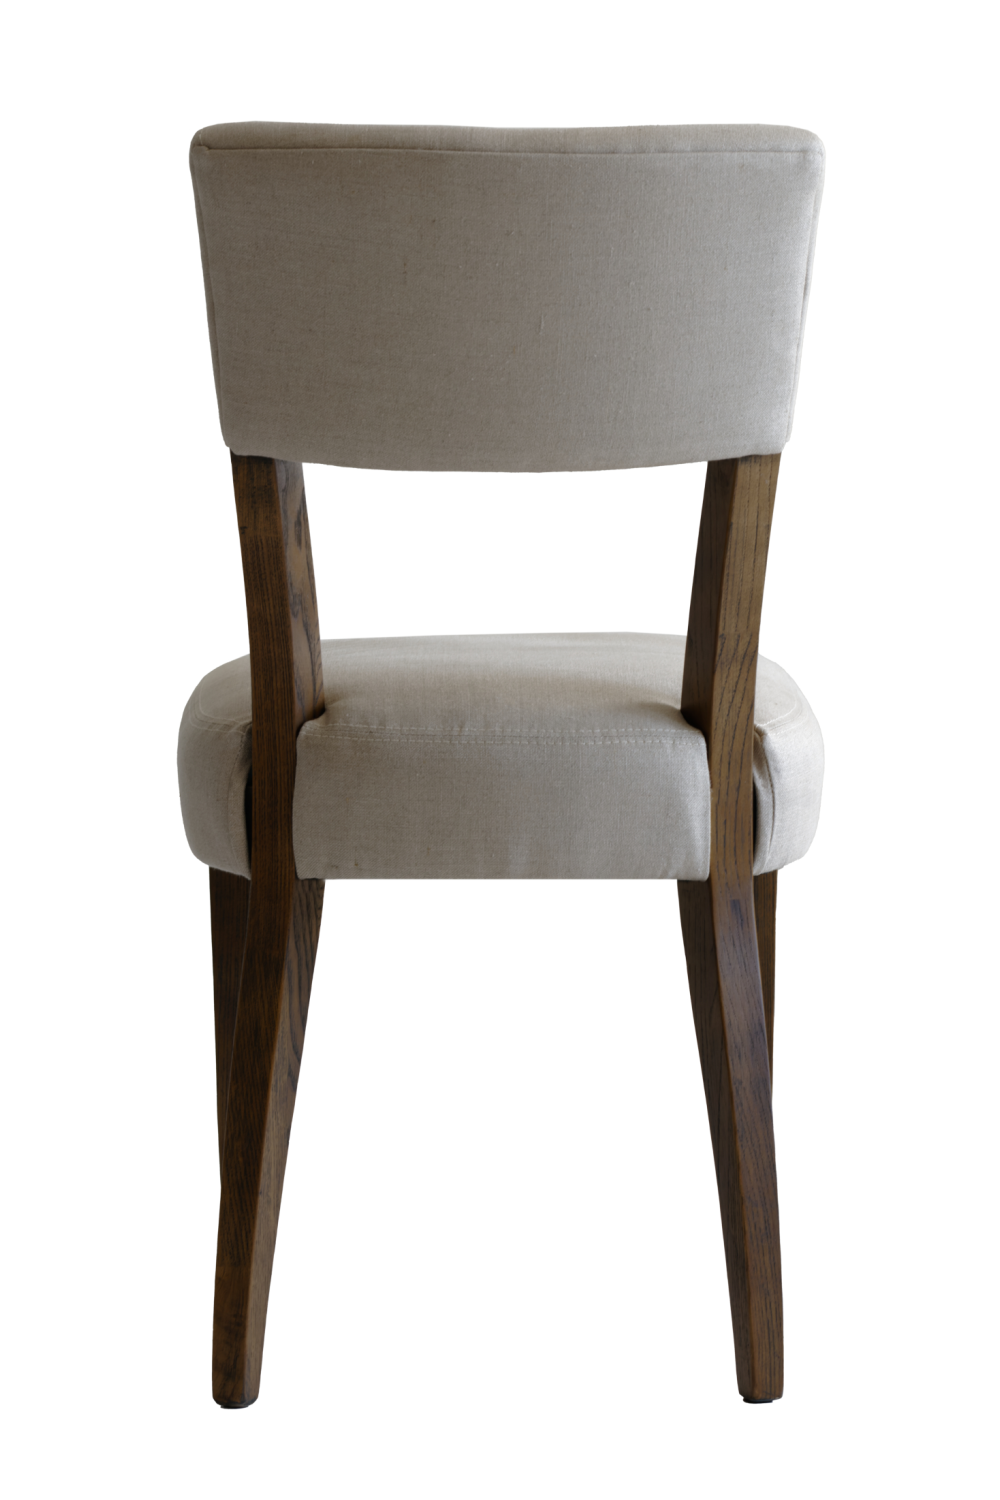 Off White Linen Dining Chair | Andrew Martin Diego | Oroa.com